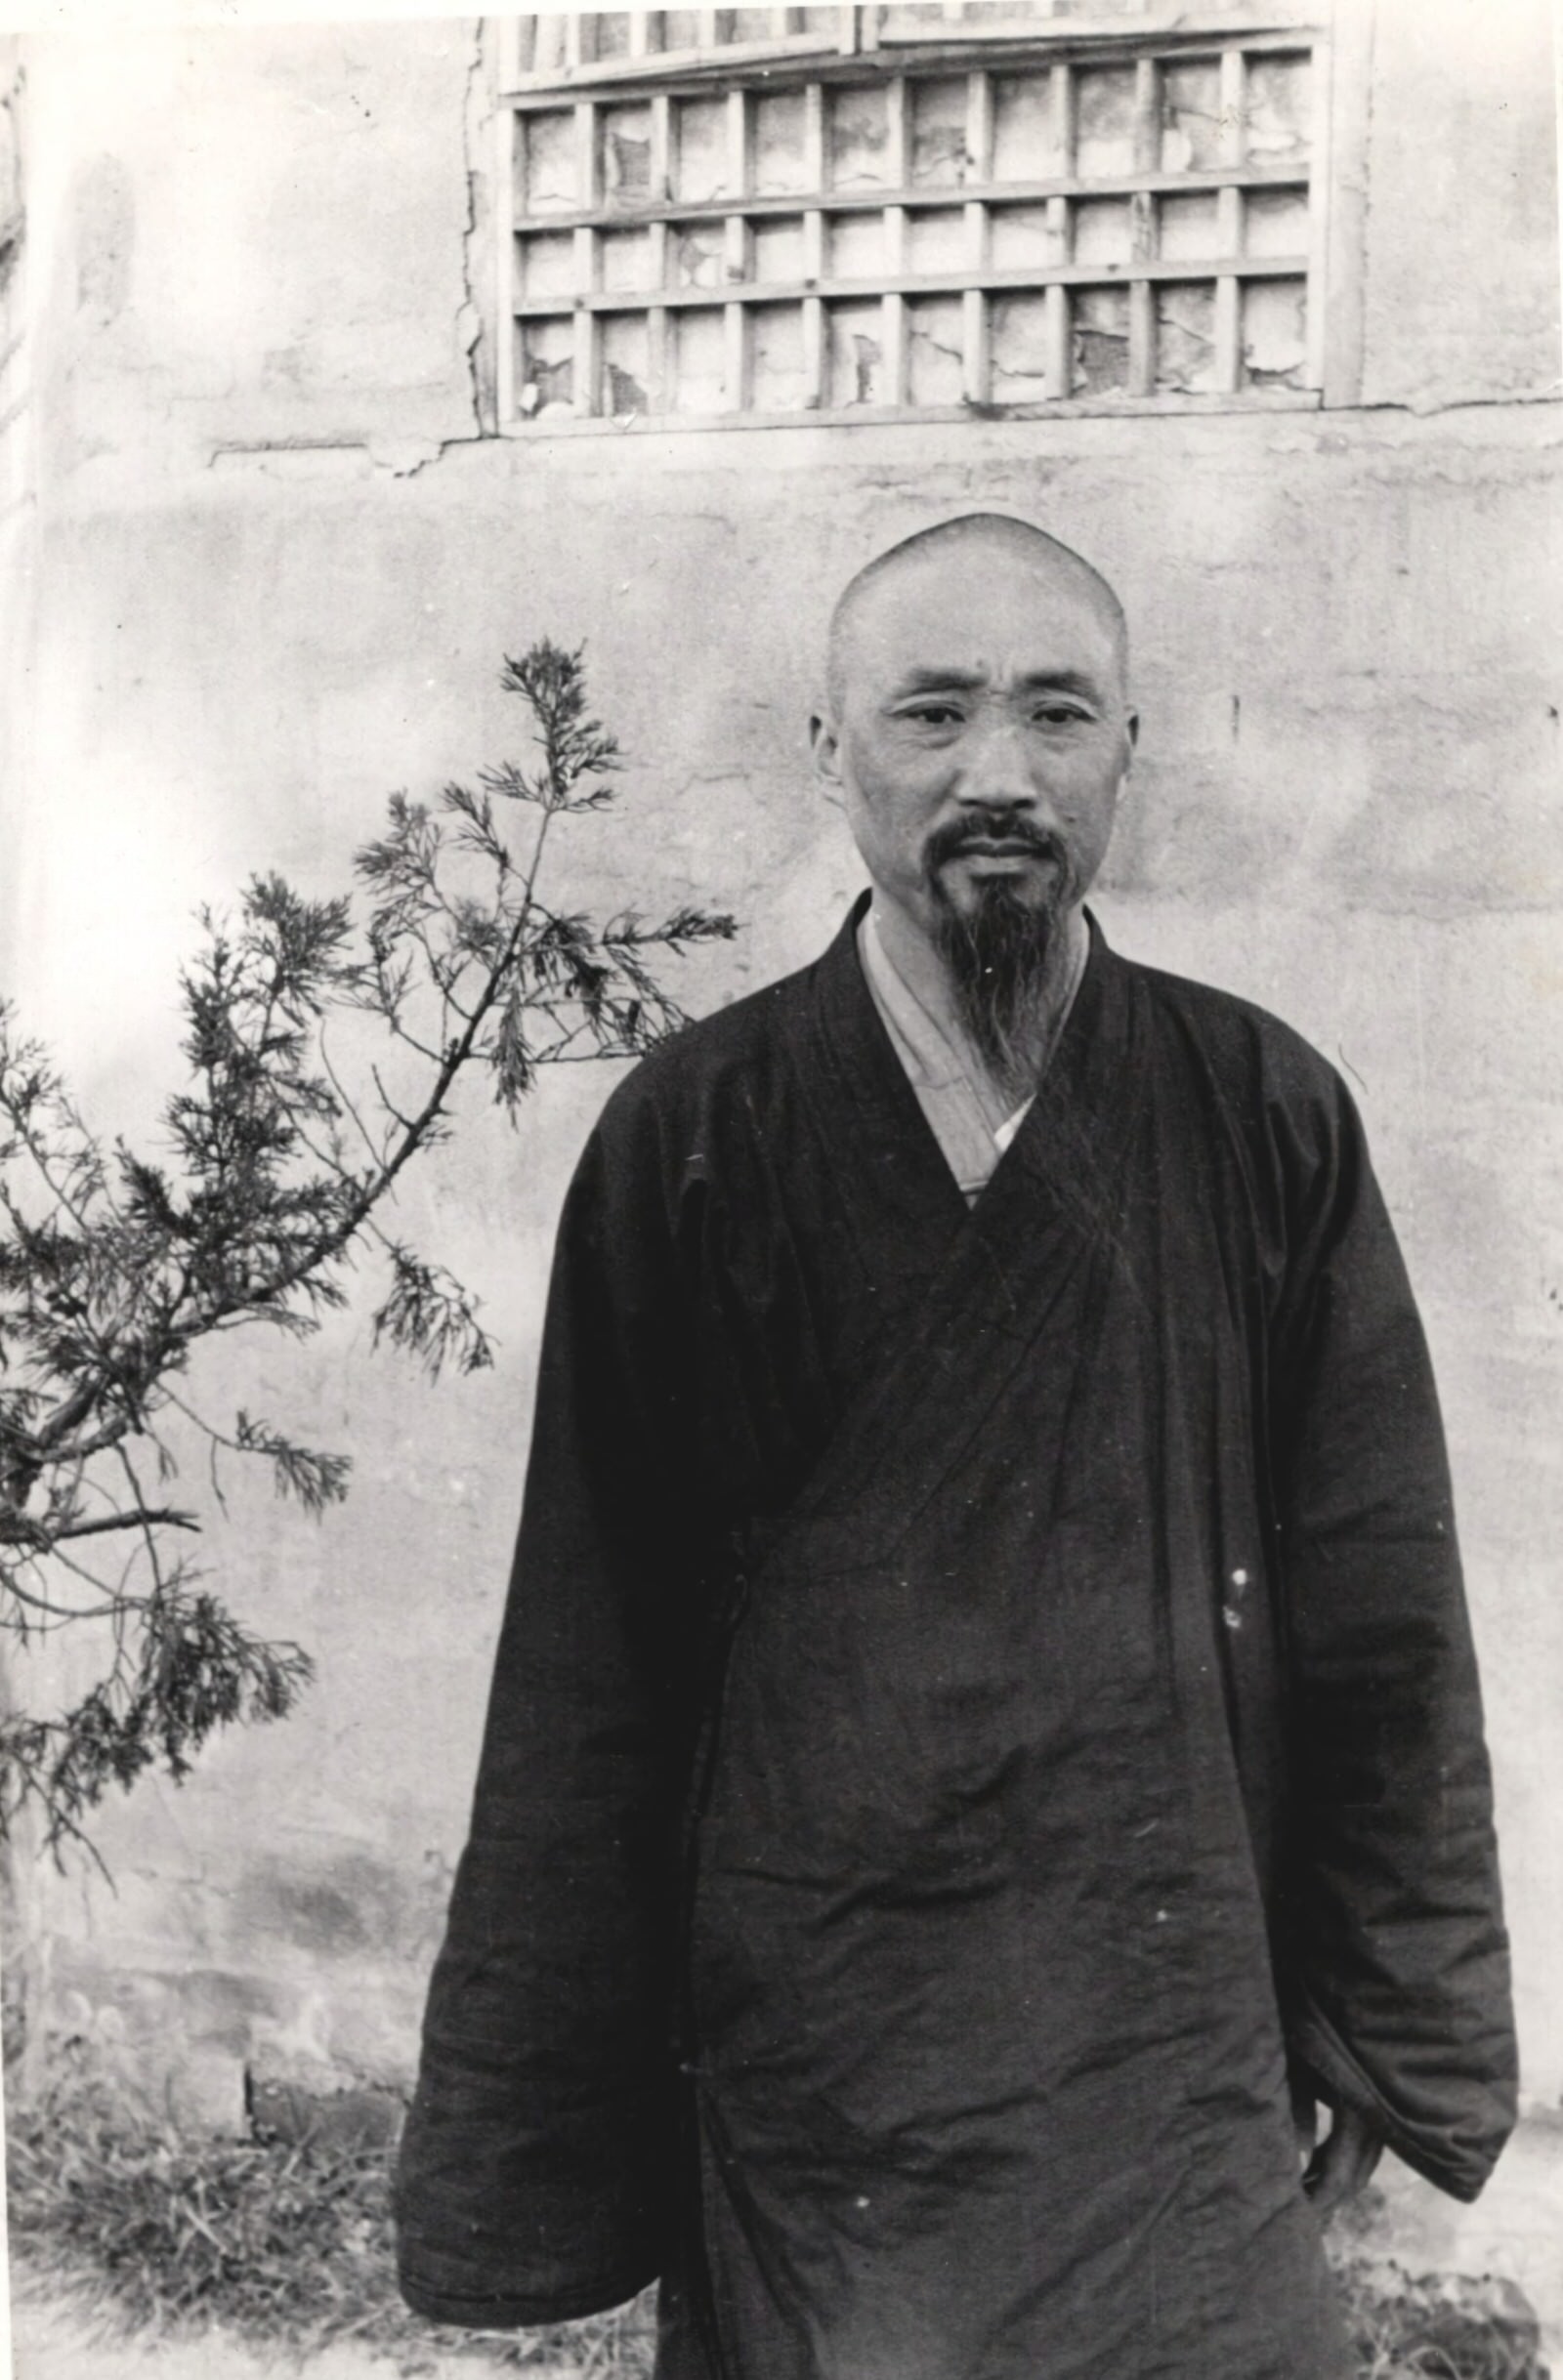 Hung Shan (Huang Shan), Buddhist monk in charge of Government refugee relief work in Anhwei (Anhui) Province. 1937-1940